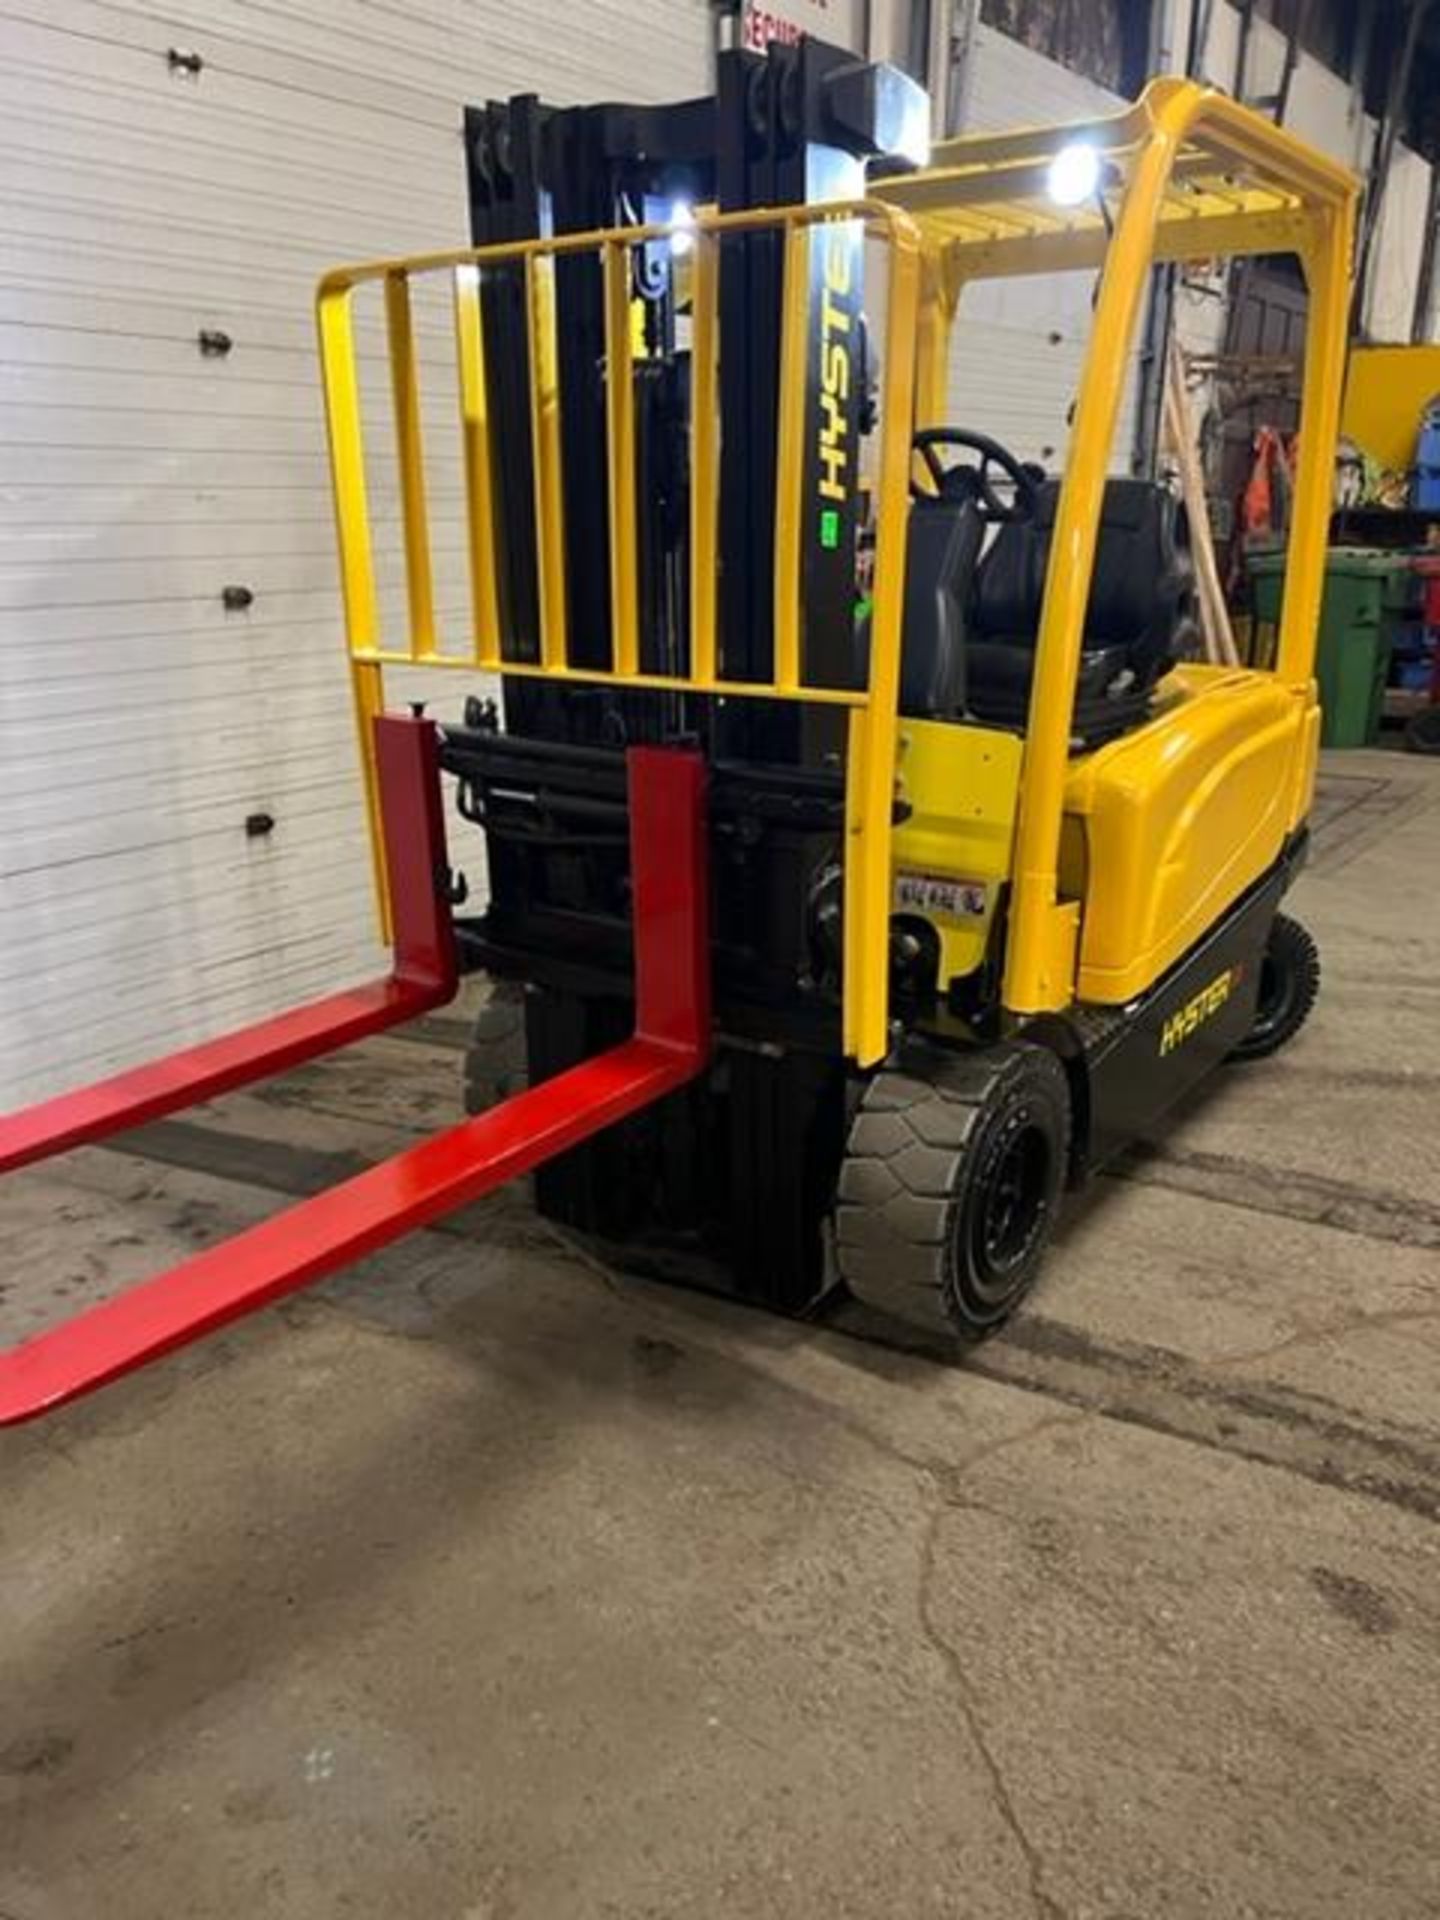 FREE CUSTOMS - MINT LIKE NEW 2015 Hyster model 50 - 5,000lbs Capacity Indoor Outdoor Forklift - Image 2 of 4